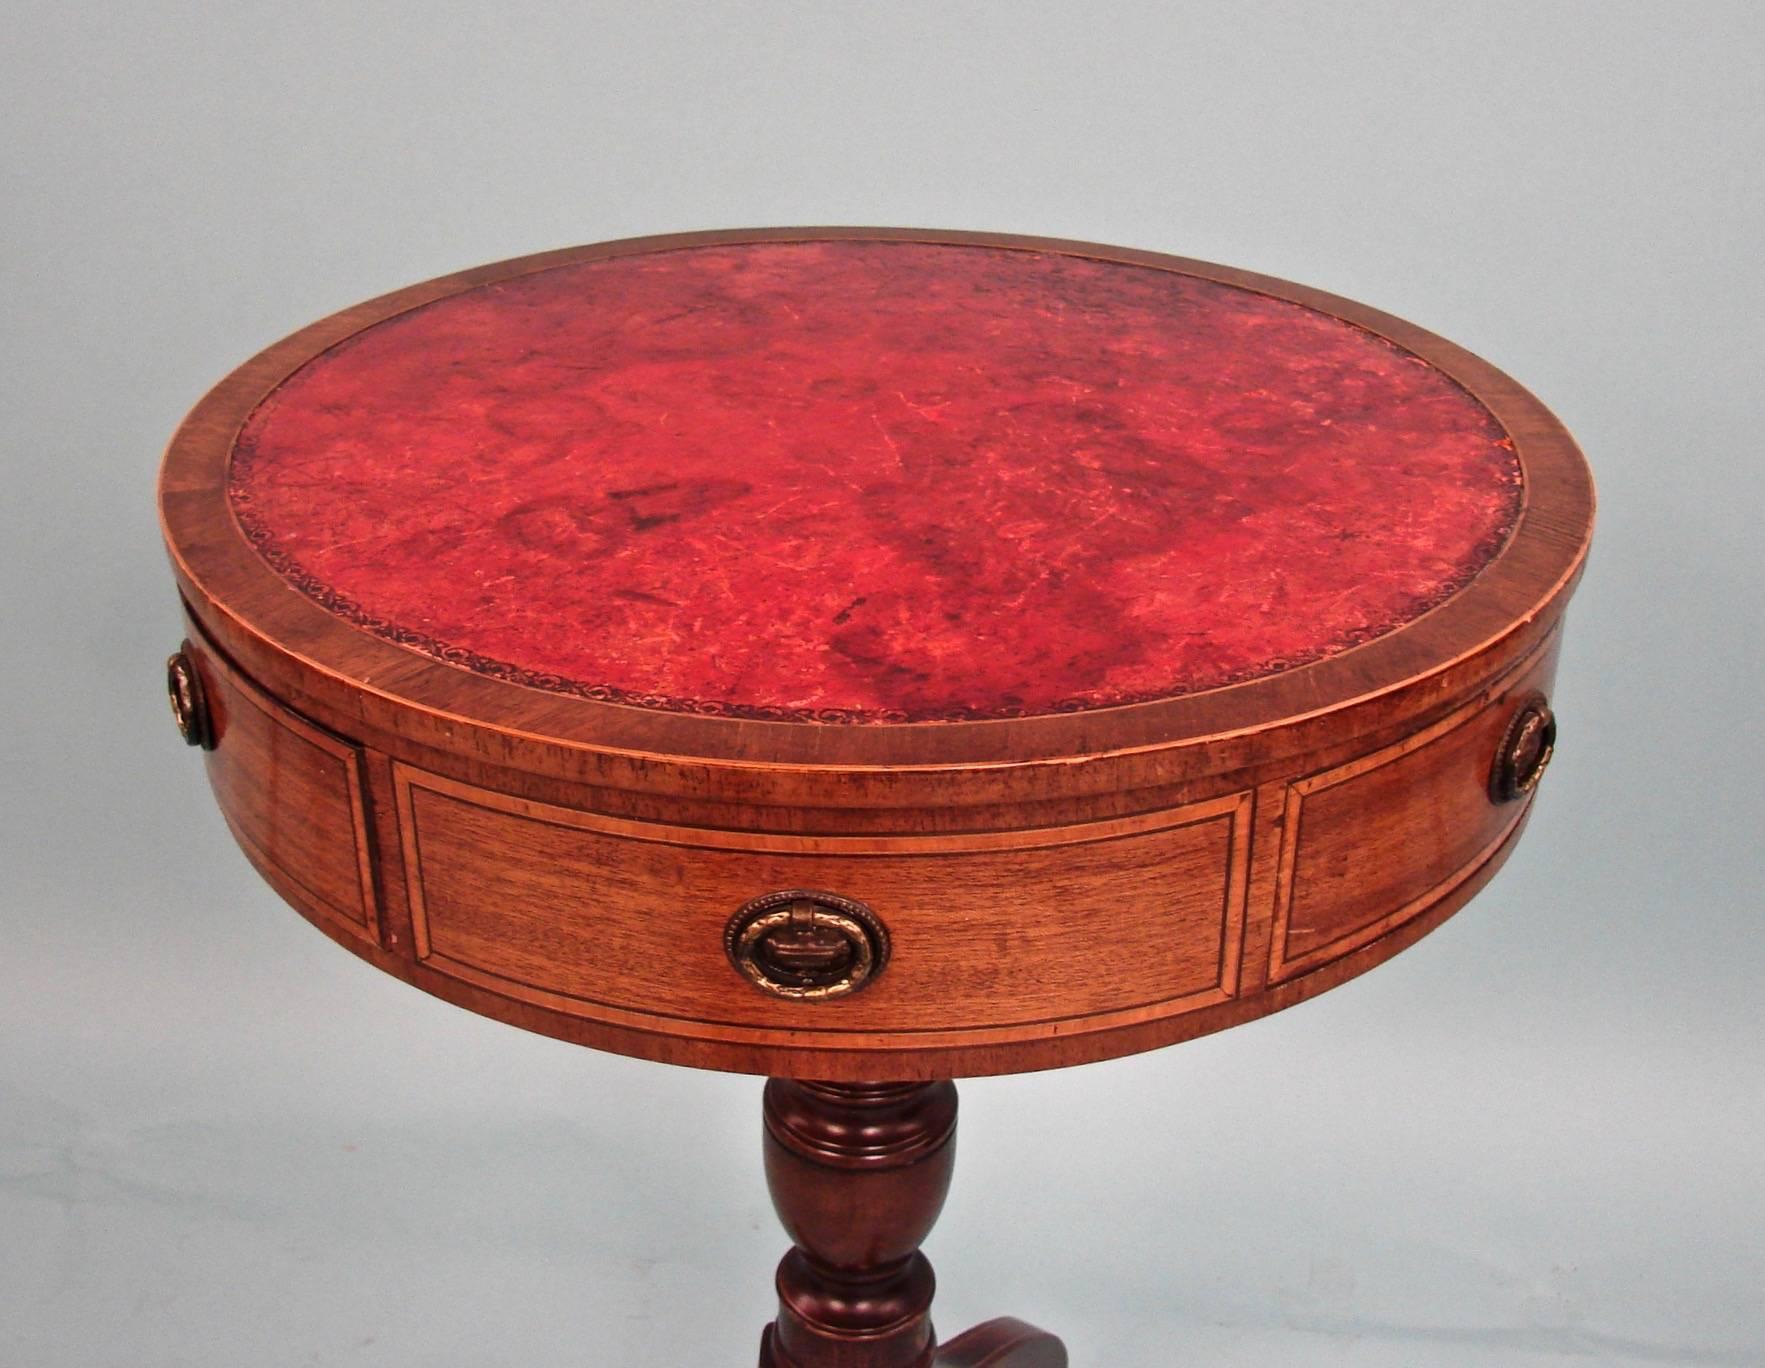 Regency Style Inlaid Mahogany Small Drum Table with Tooled Red Leather Top 1